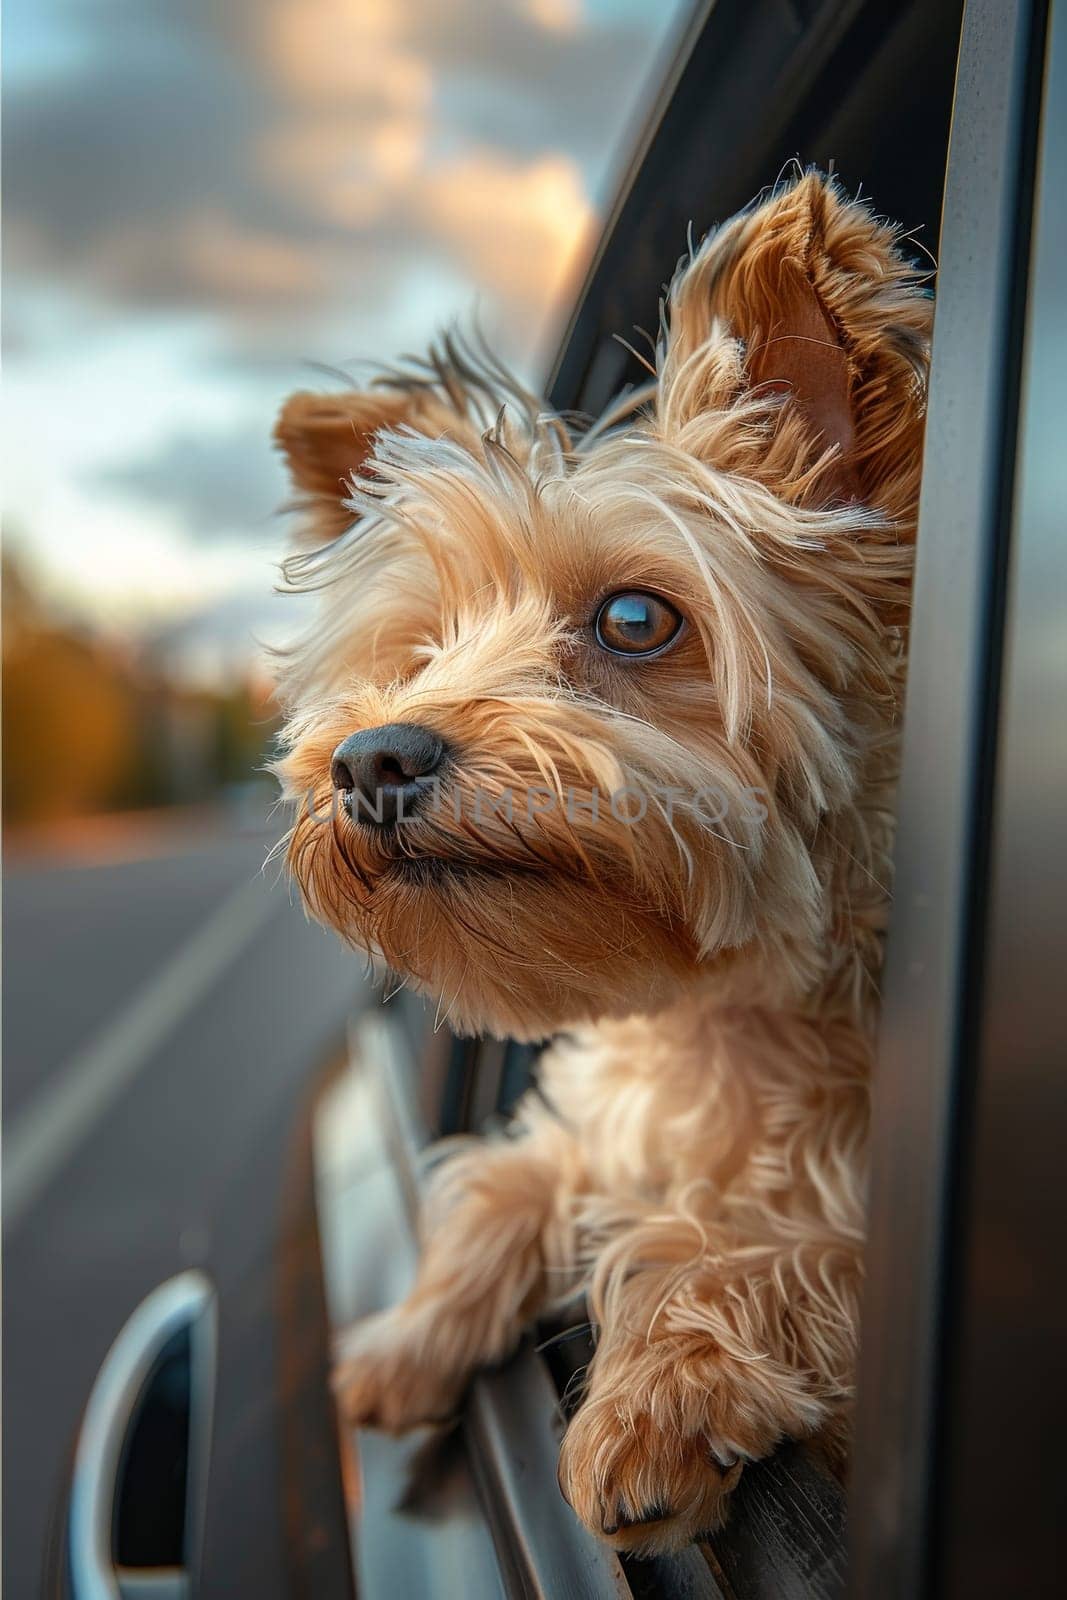 A small dog with a fluffy coat is sitting in a car window by itchaznong